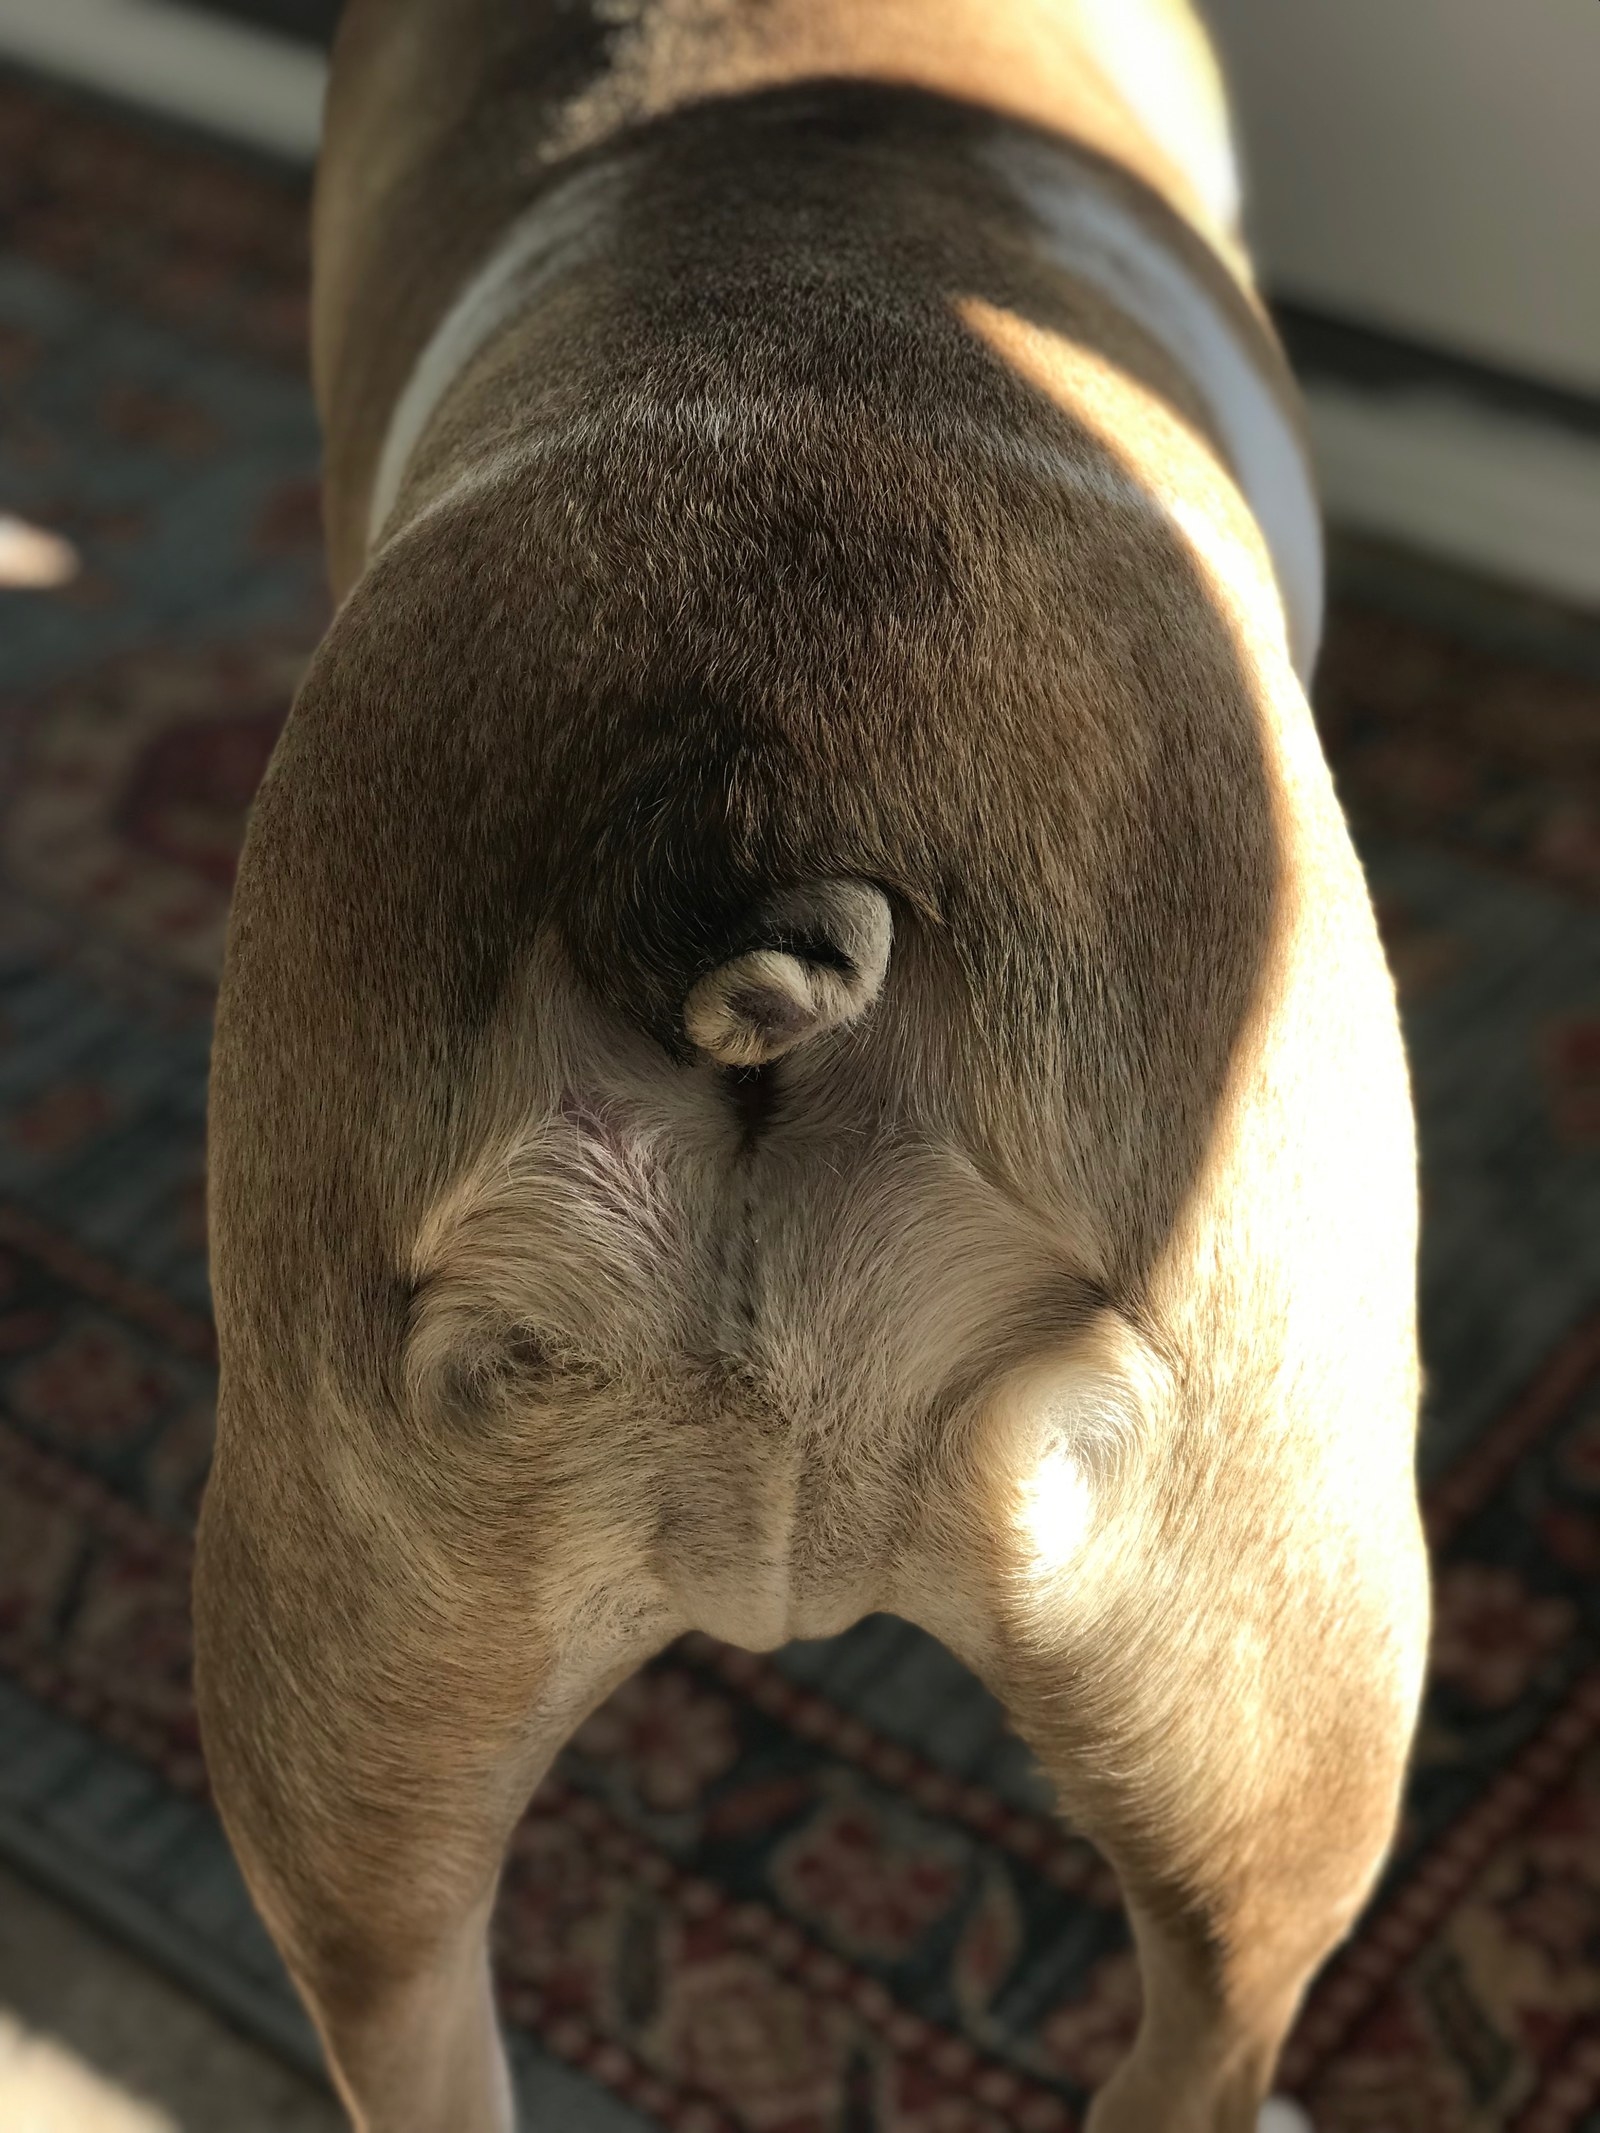 What Does My Dog's Butt Look Like?